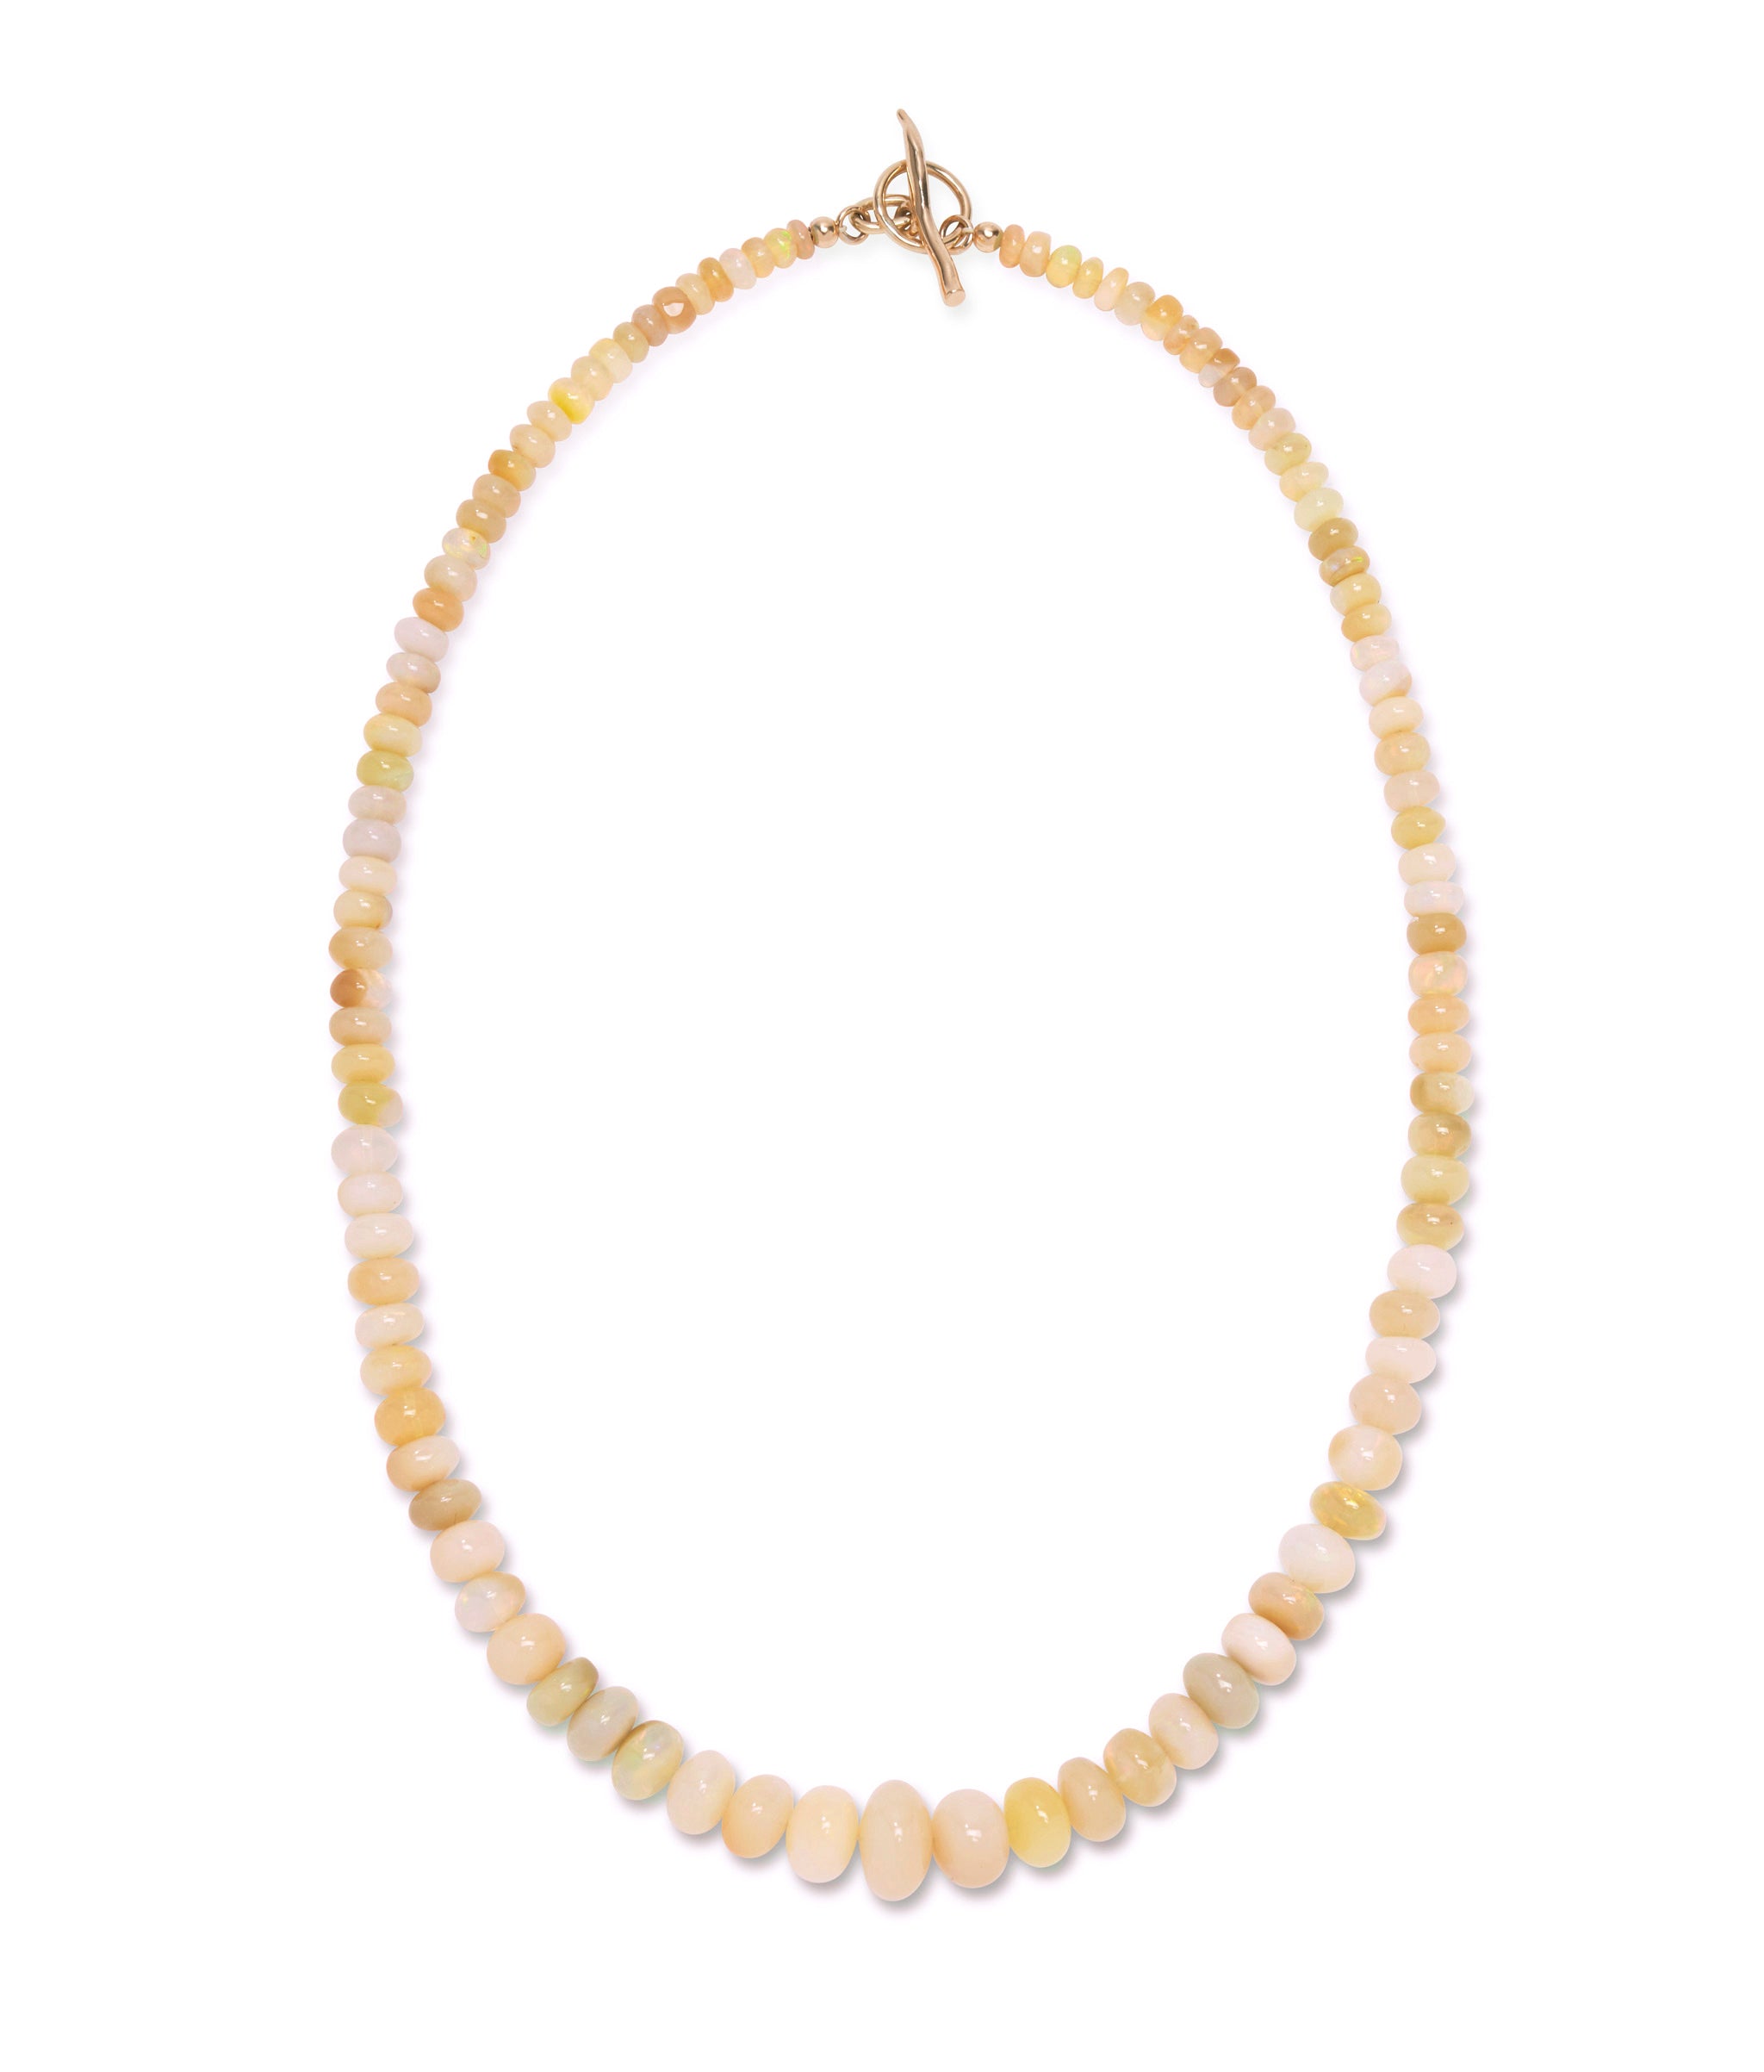 14K Opal Single Strand Necklace. Graduated opal beads with gold ring and toggle closure.